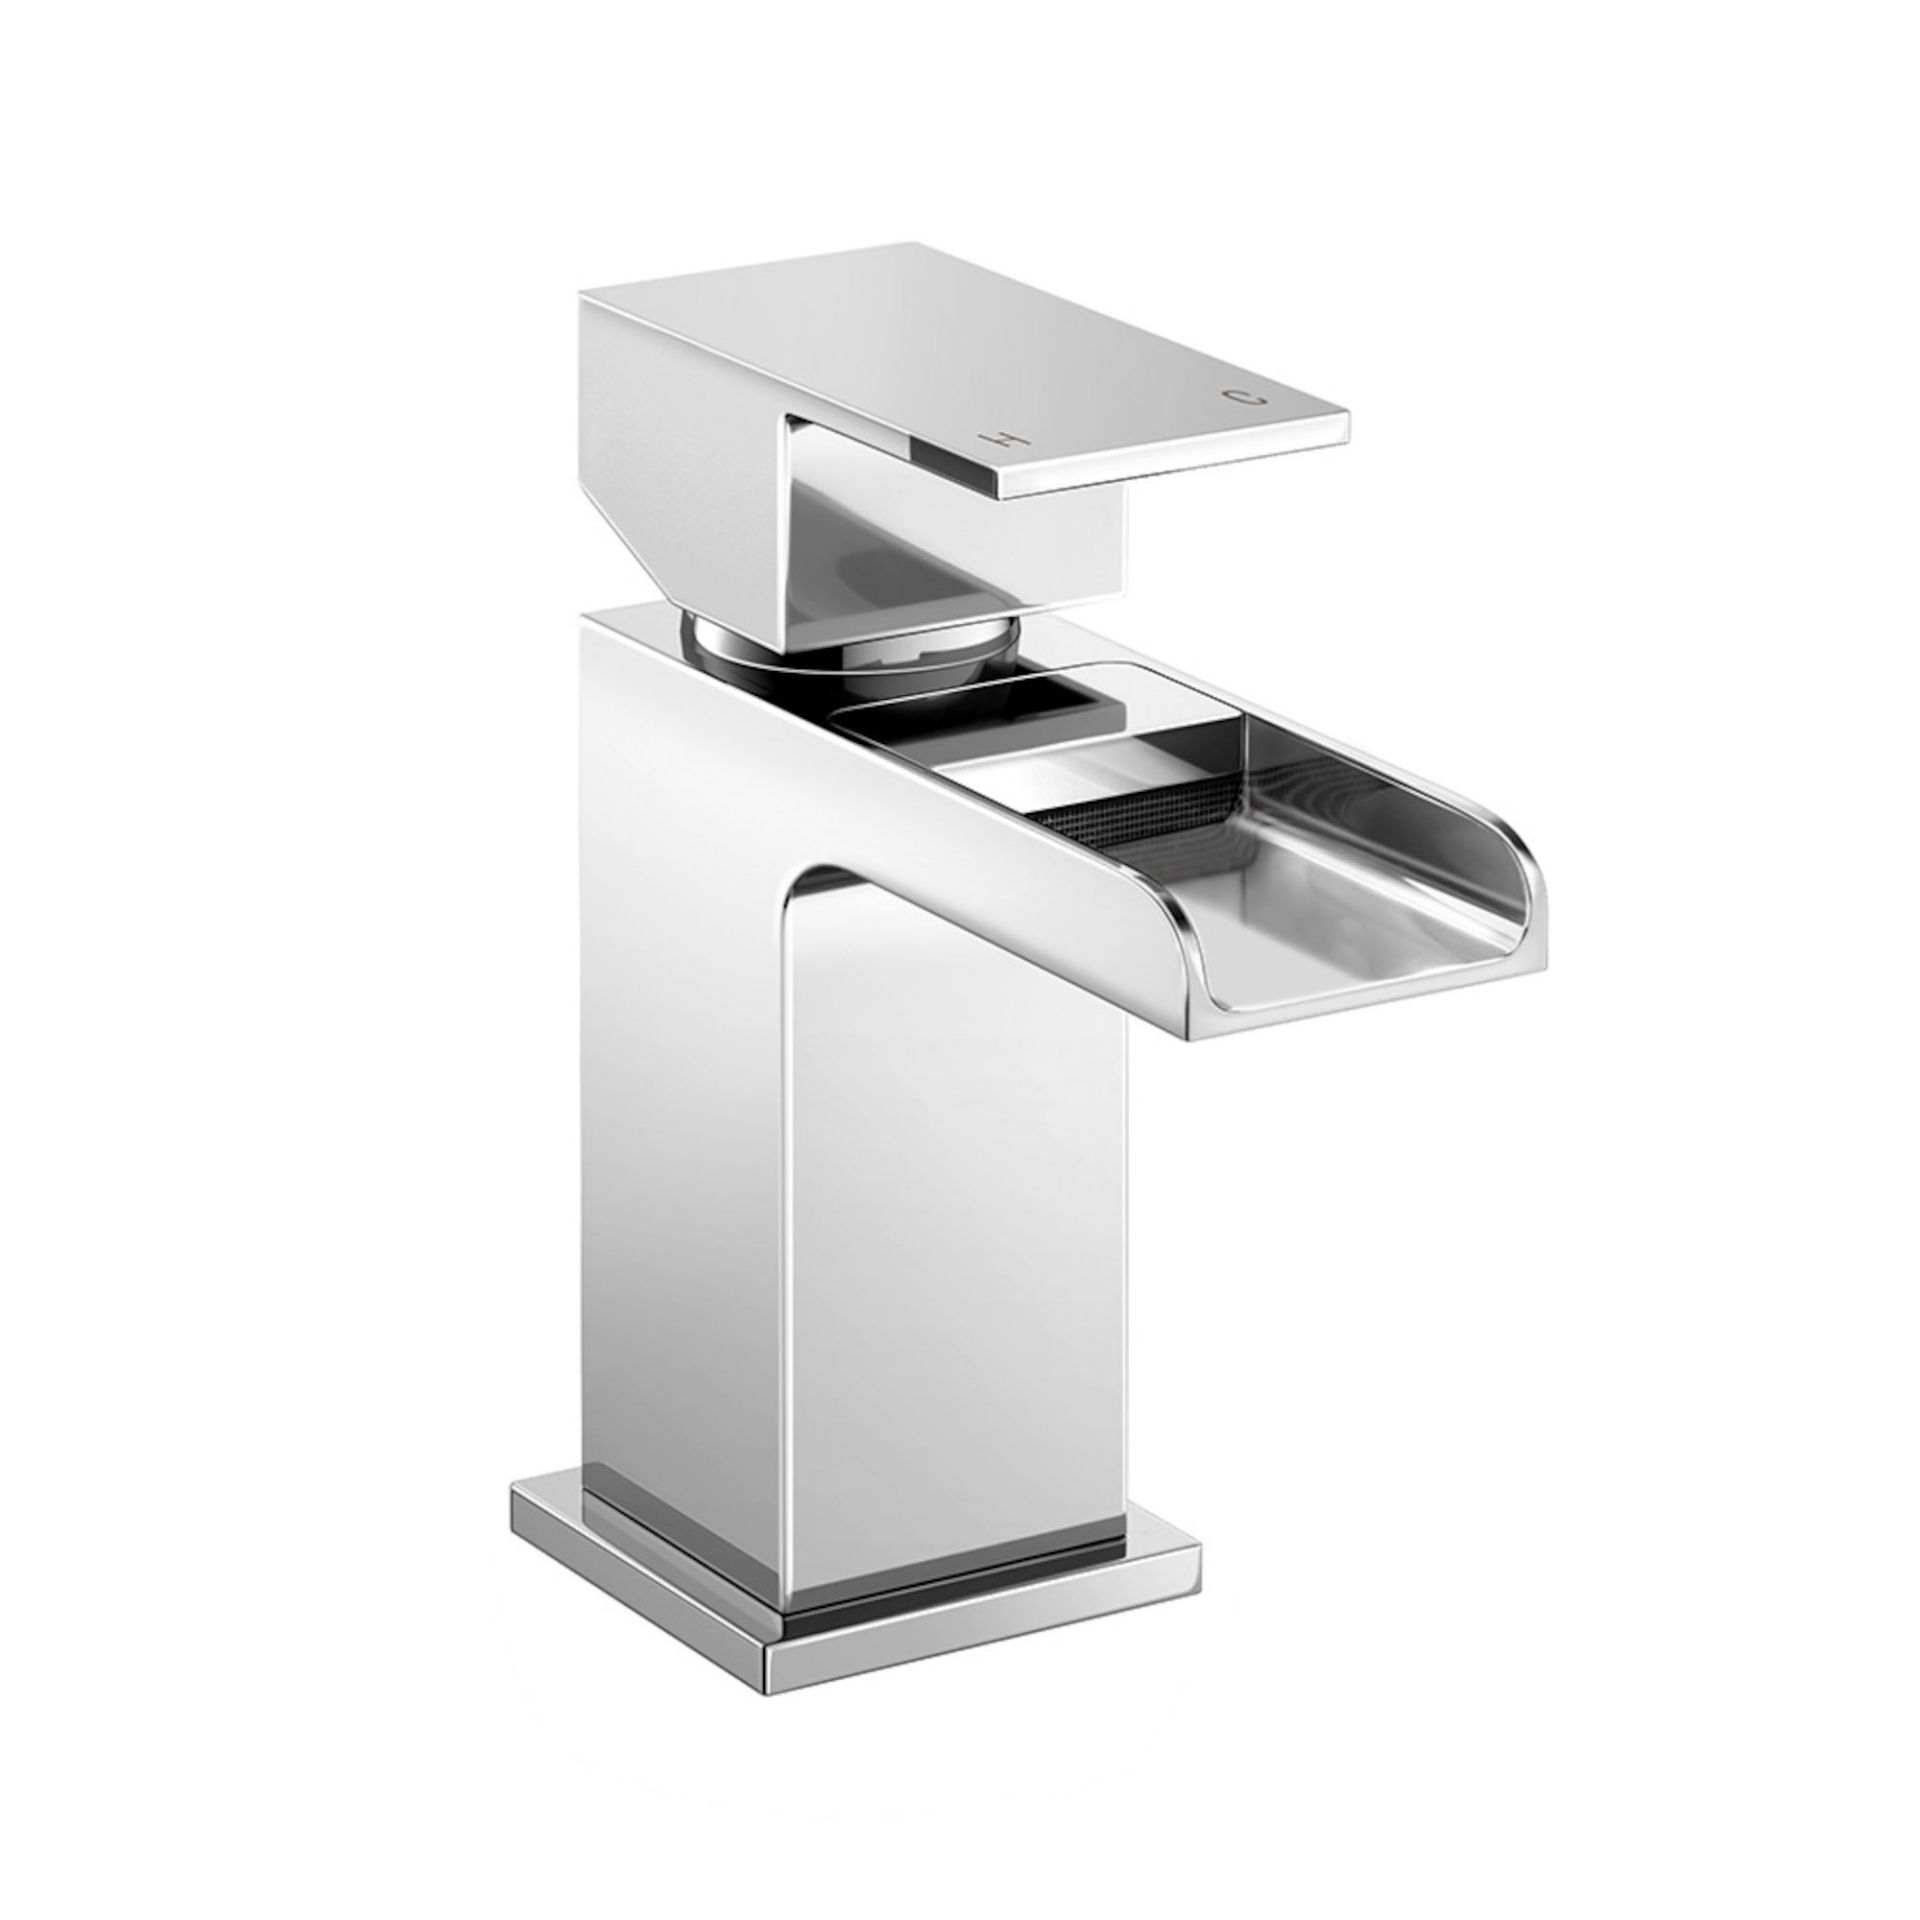 (M1088) Niagra II Cloakroom Basin Mixer Tap Chrome plated corrosion free. Crafted from chrome... - Image 2 of 3